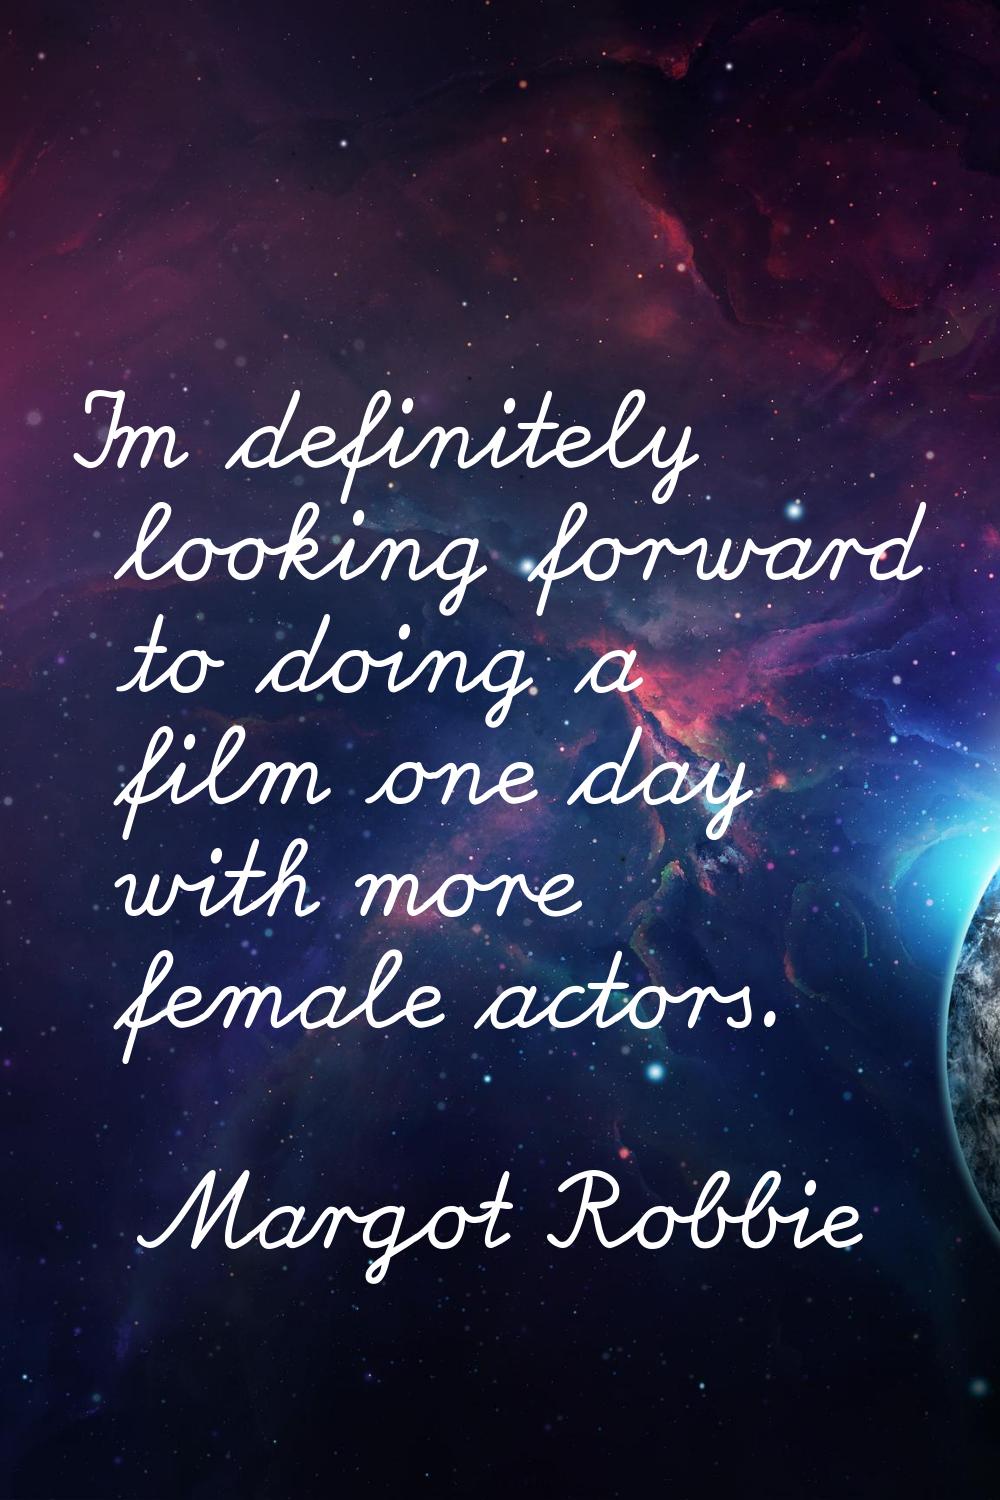 I'm definitely looking forward to doing a film one day with more female actors.